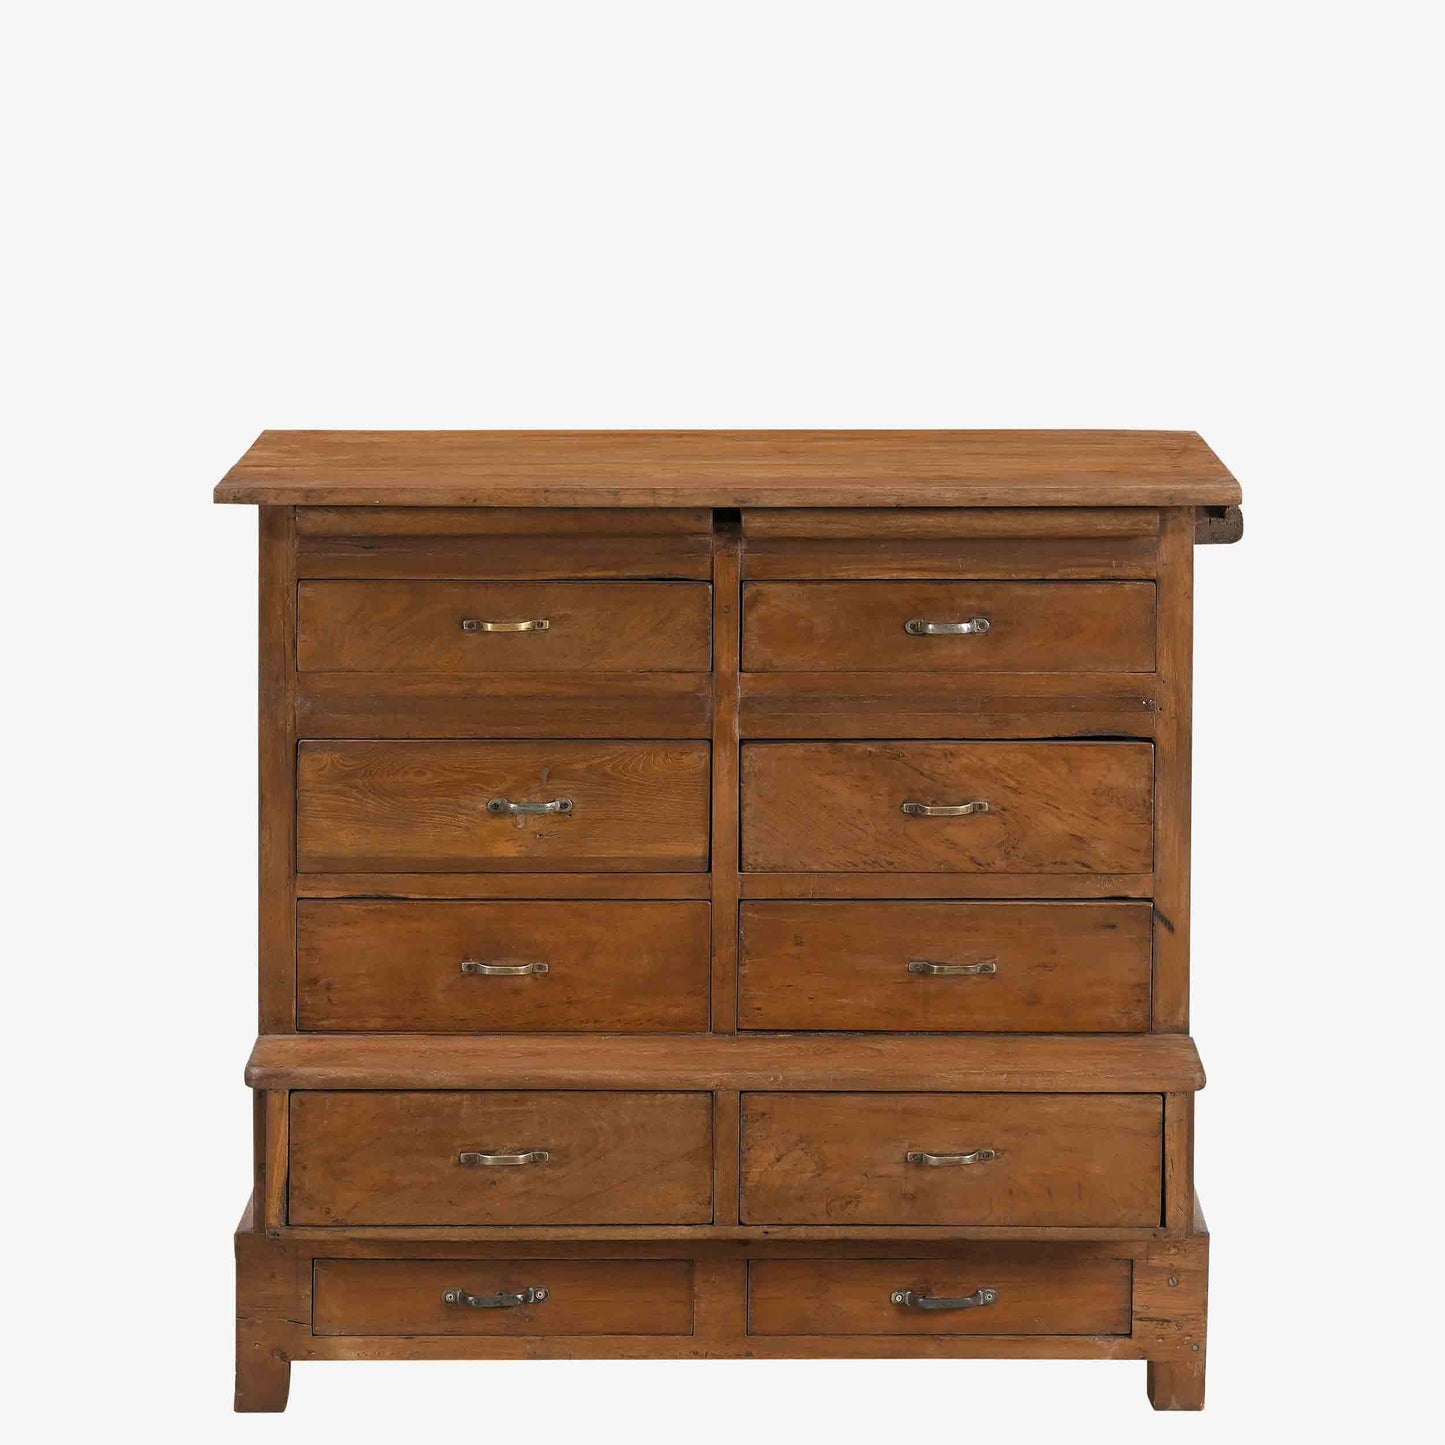 The Kellan Antique Chest of Drawers